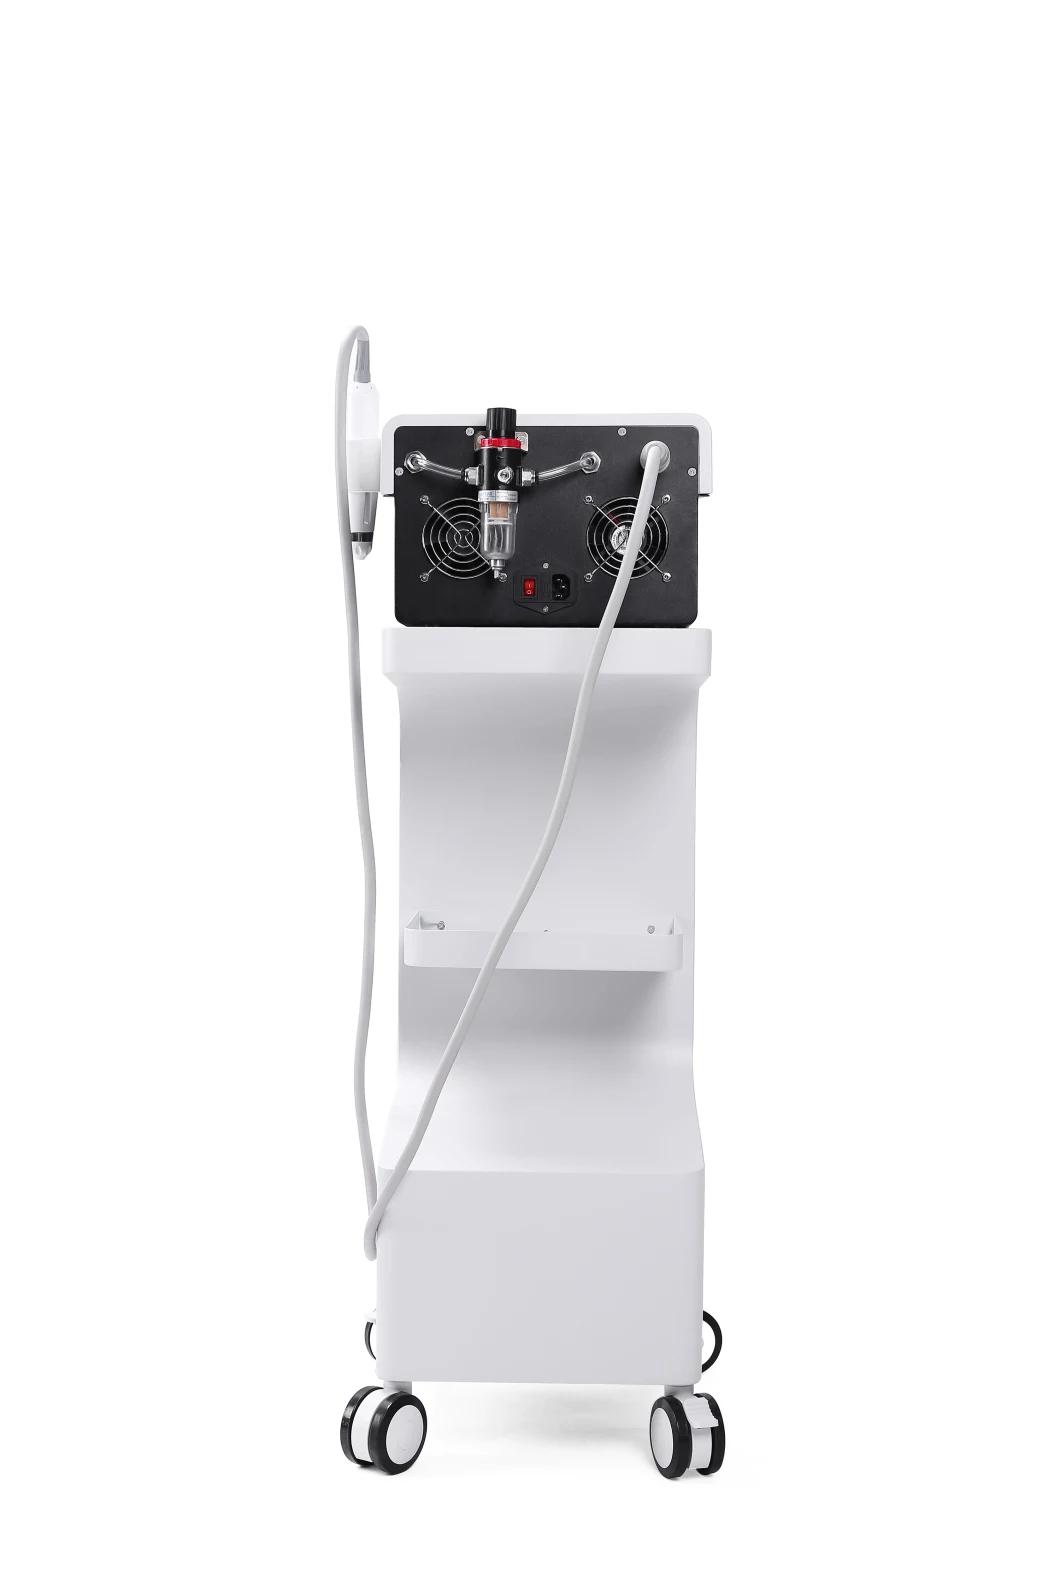 New Arrival Non-Invasive Mesotherapy Beauty Machine for Skin Rejuvenation Wrinkle Removal